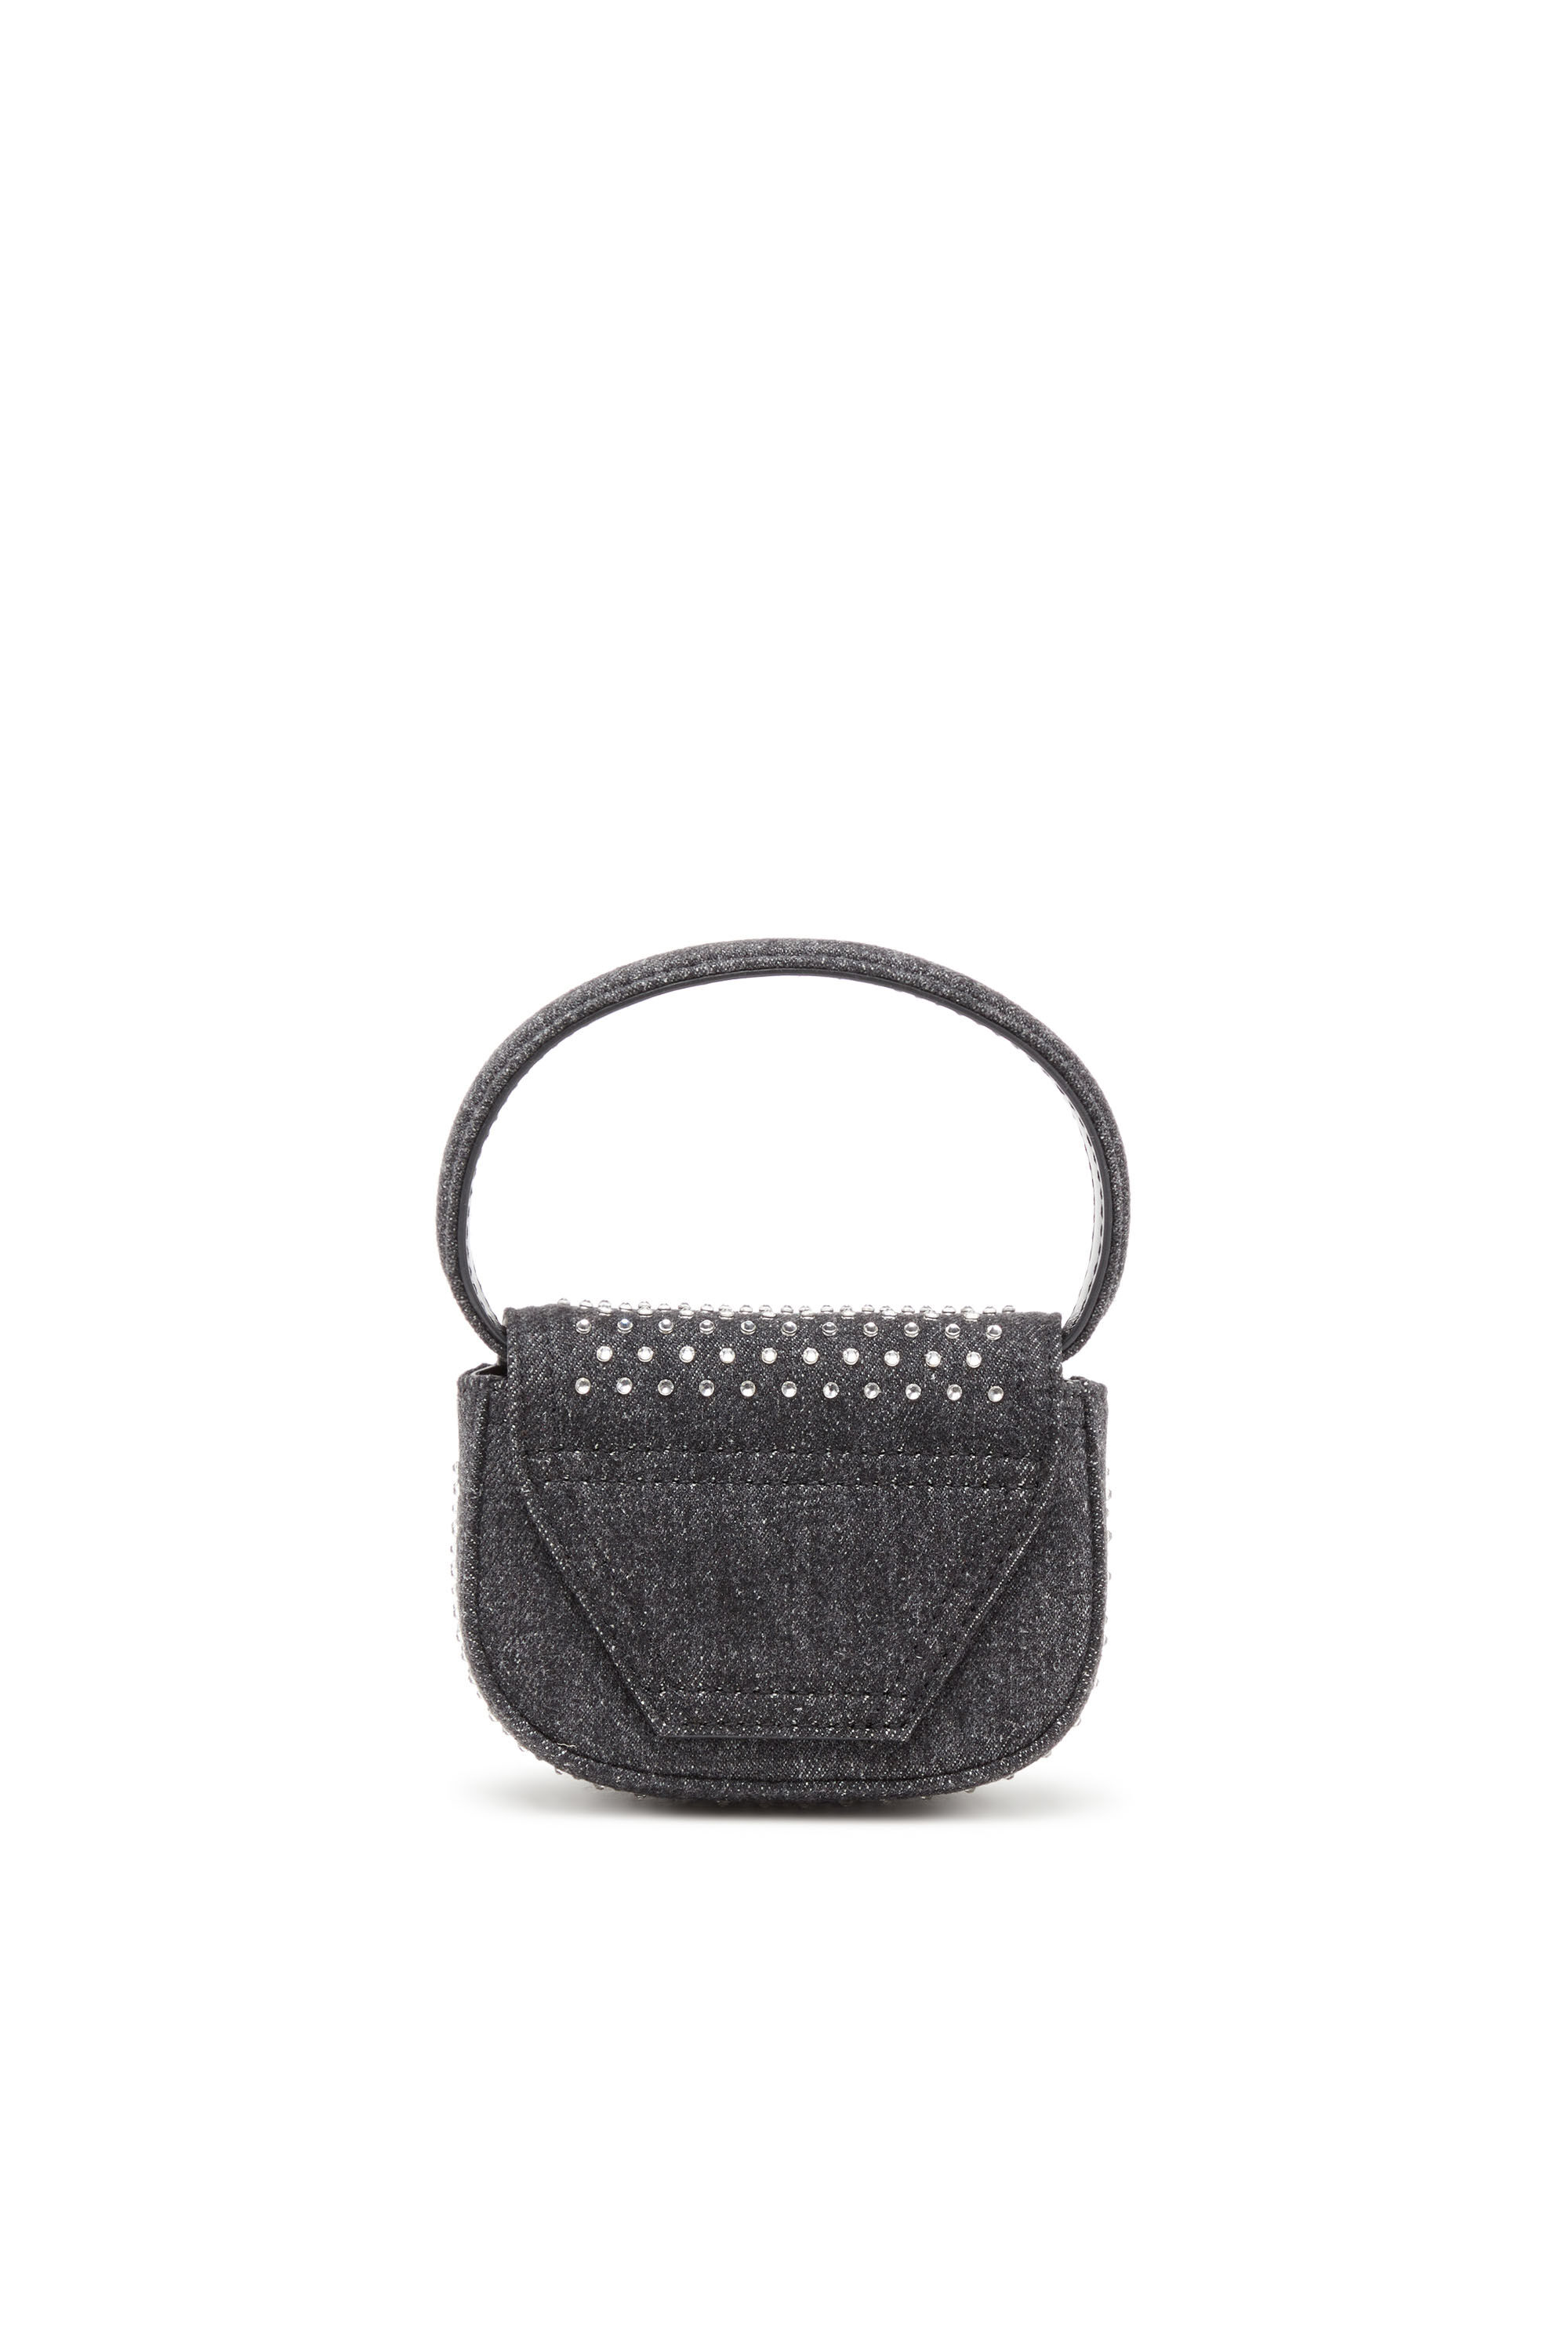 Diesel - 1DR XS, Woman 1DR Xs-Iconic mini bag in denim and crystals in Black - Image 3